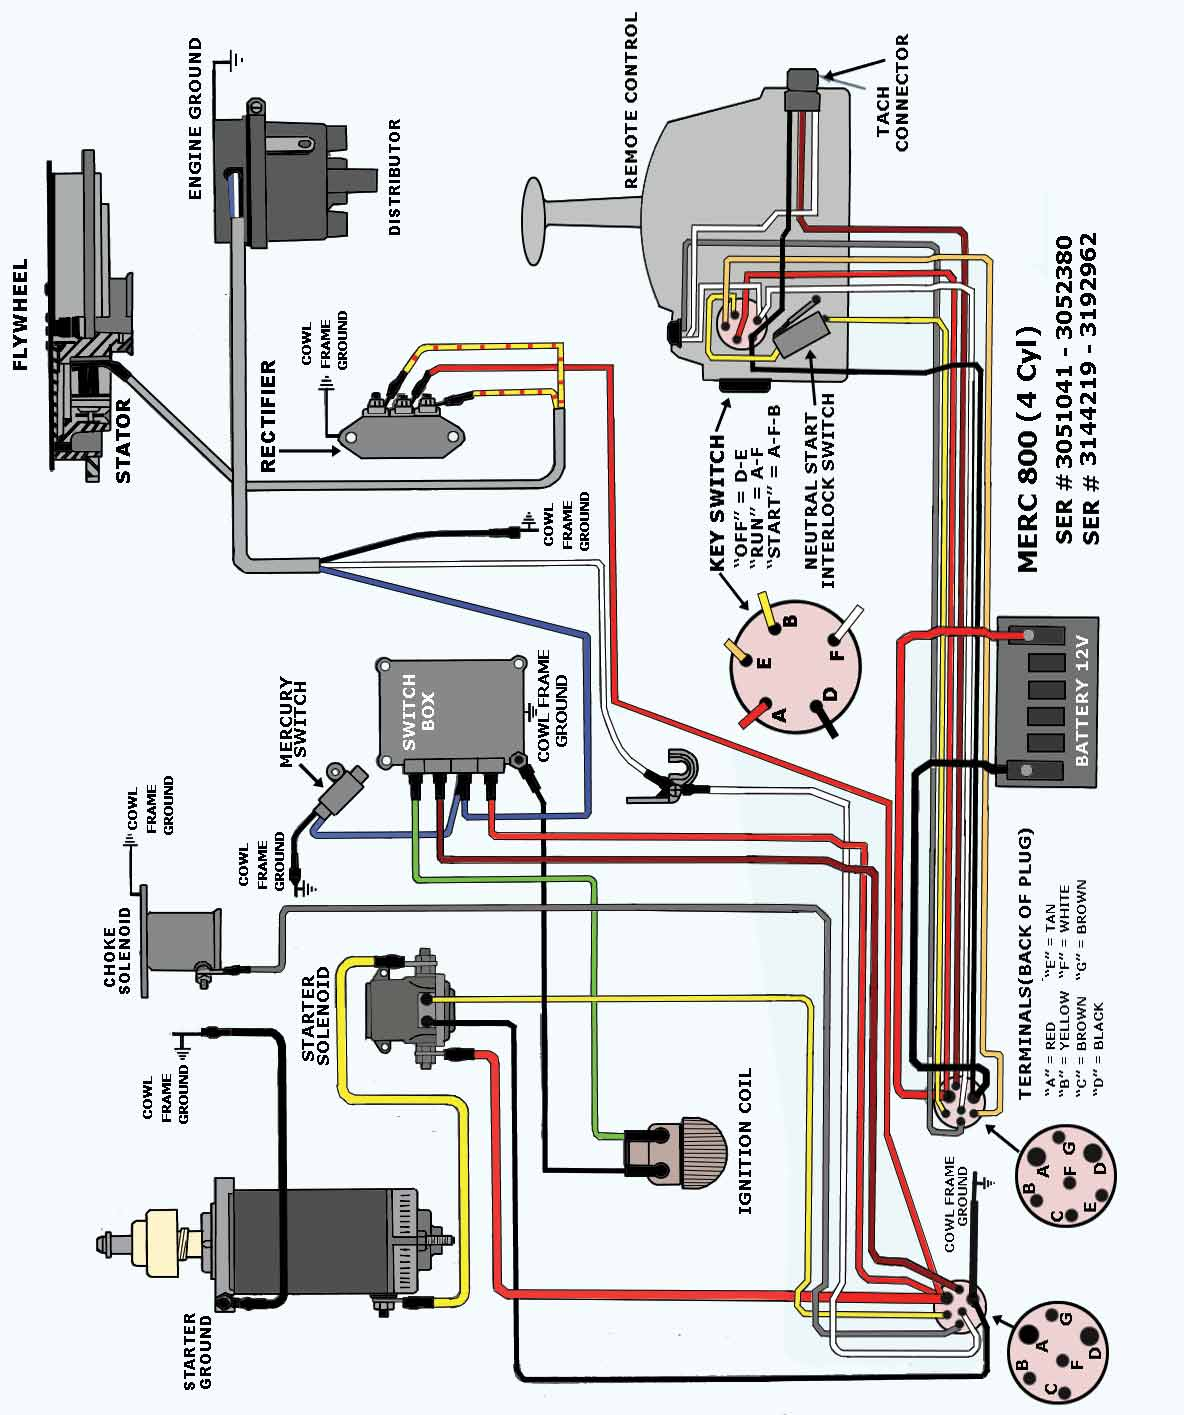 Evinrude Ignition Switch Wiring Diagram Mercury Switch Wiring Wiring Diagram Local